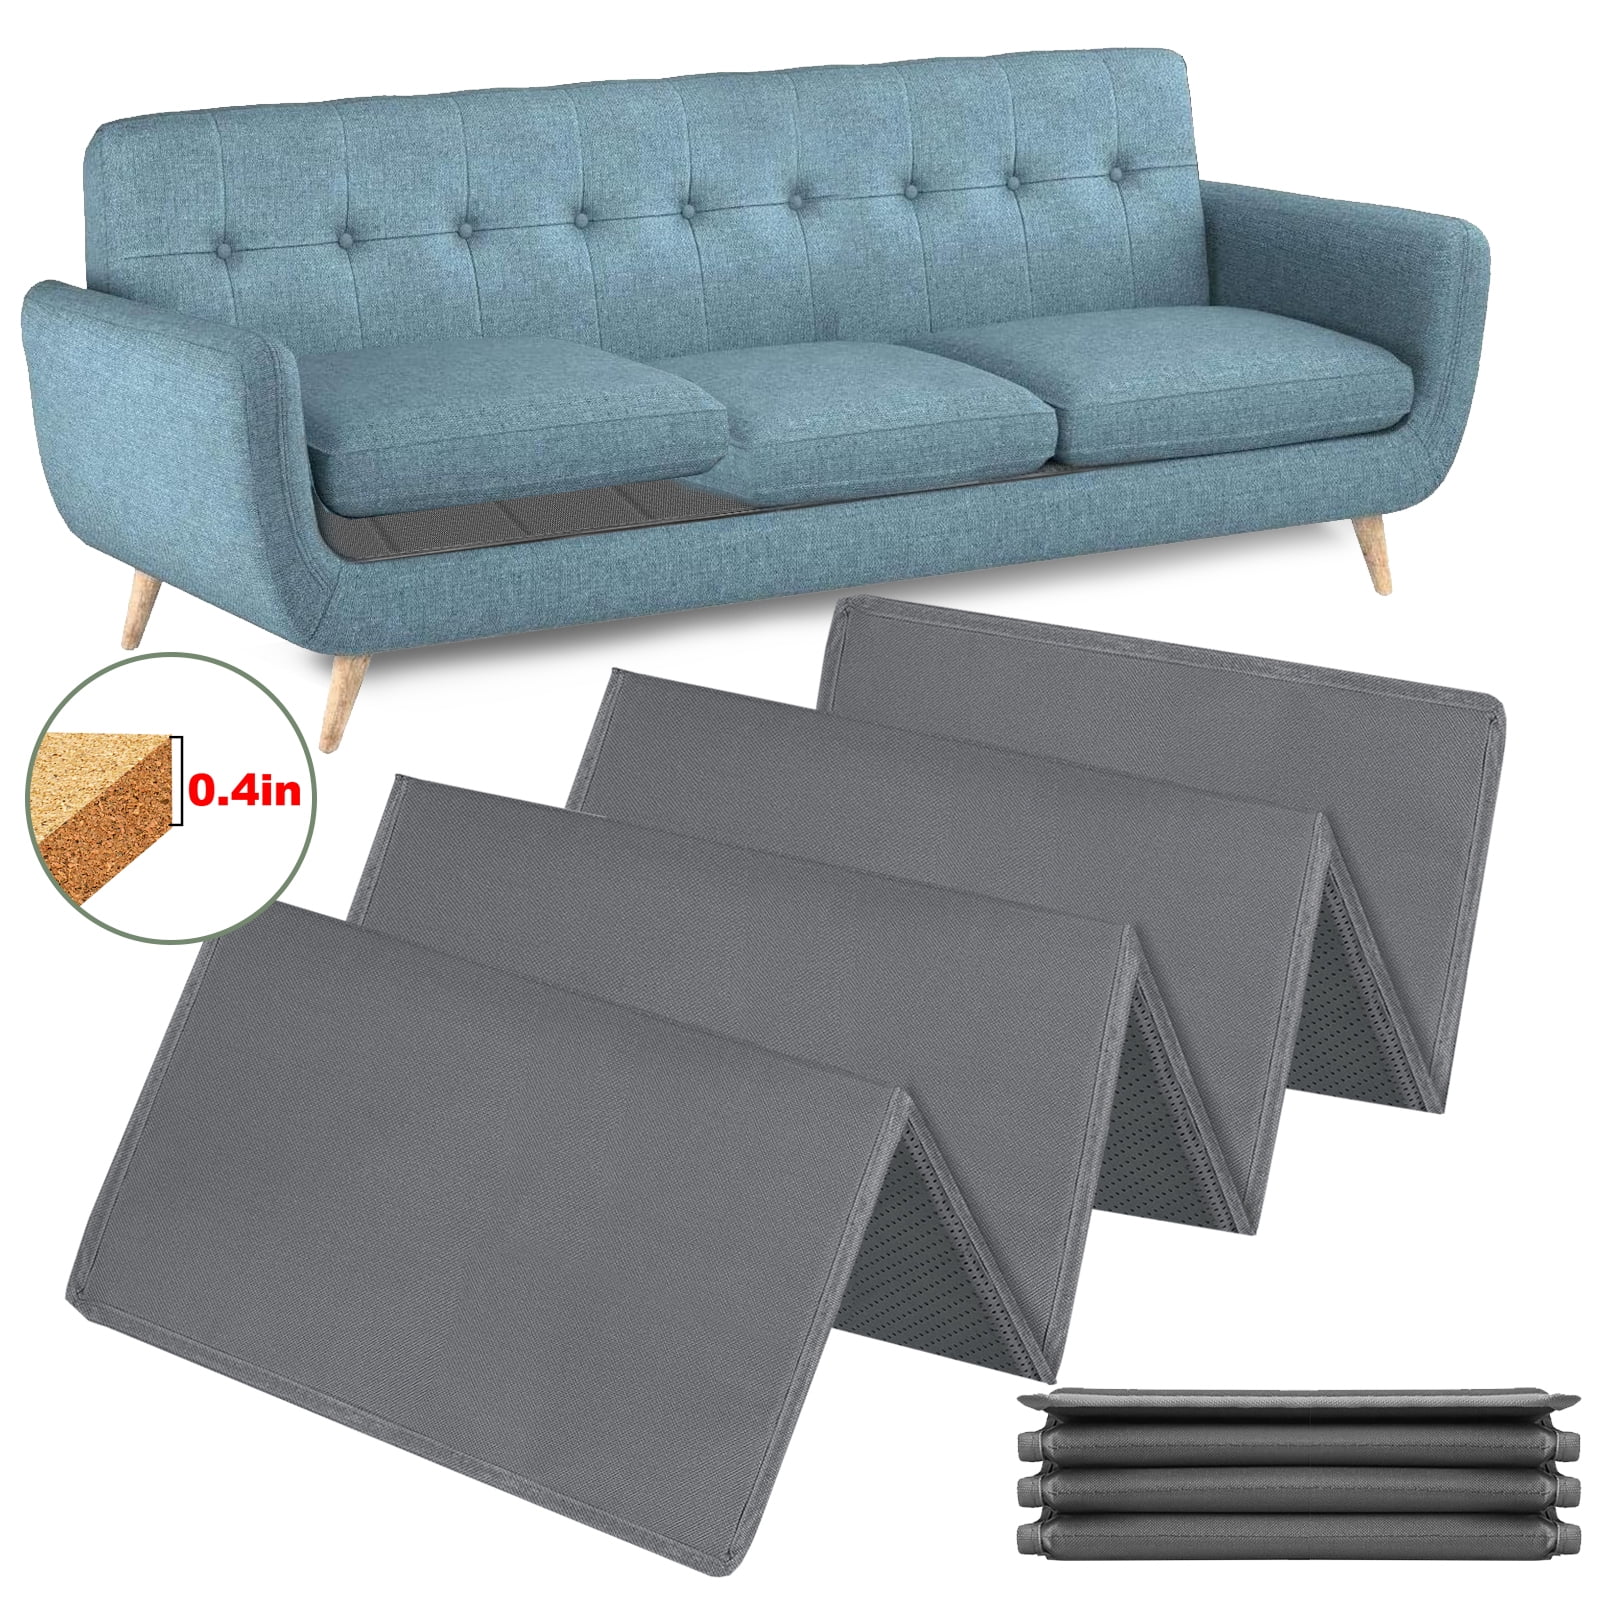  LEMATEEK Couch Cushion Support Board for Sagging Seat- Foldable Couch  Supports for Sagging Cushions, Sofa Cushion Support for Sagging Couch, Couch  Support to Repair Sagging Sofa 20x67 : Home & Kitchen